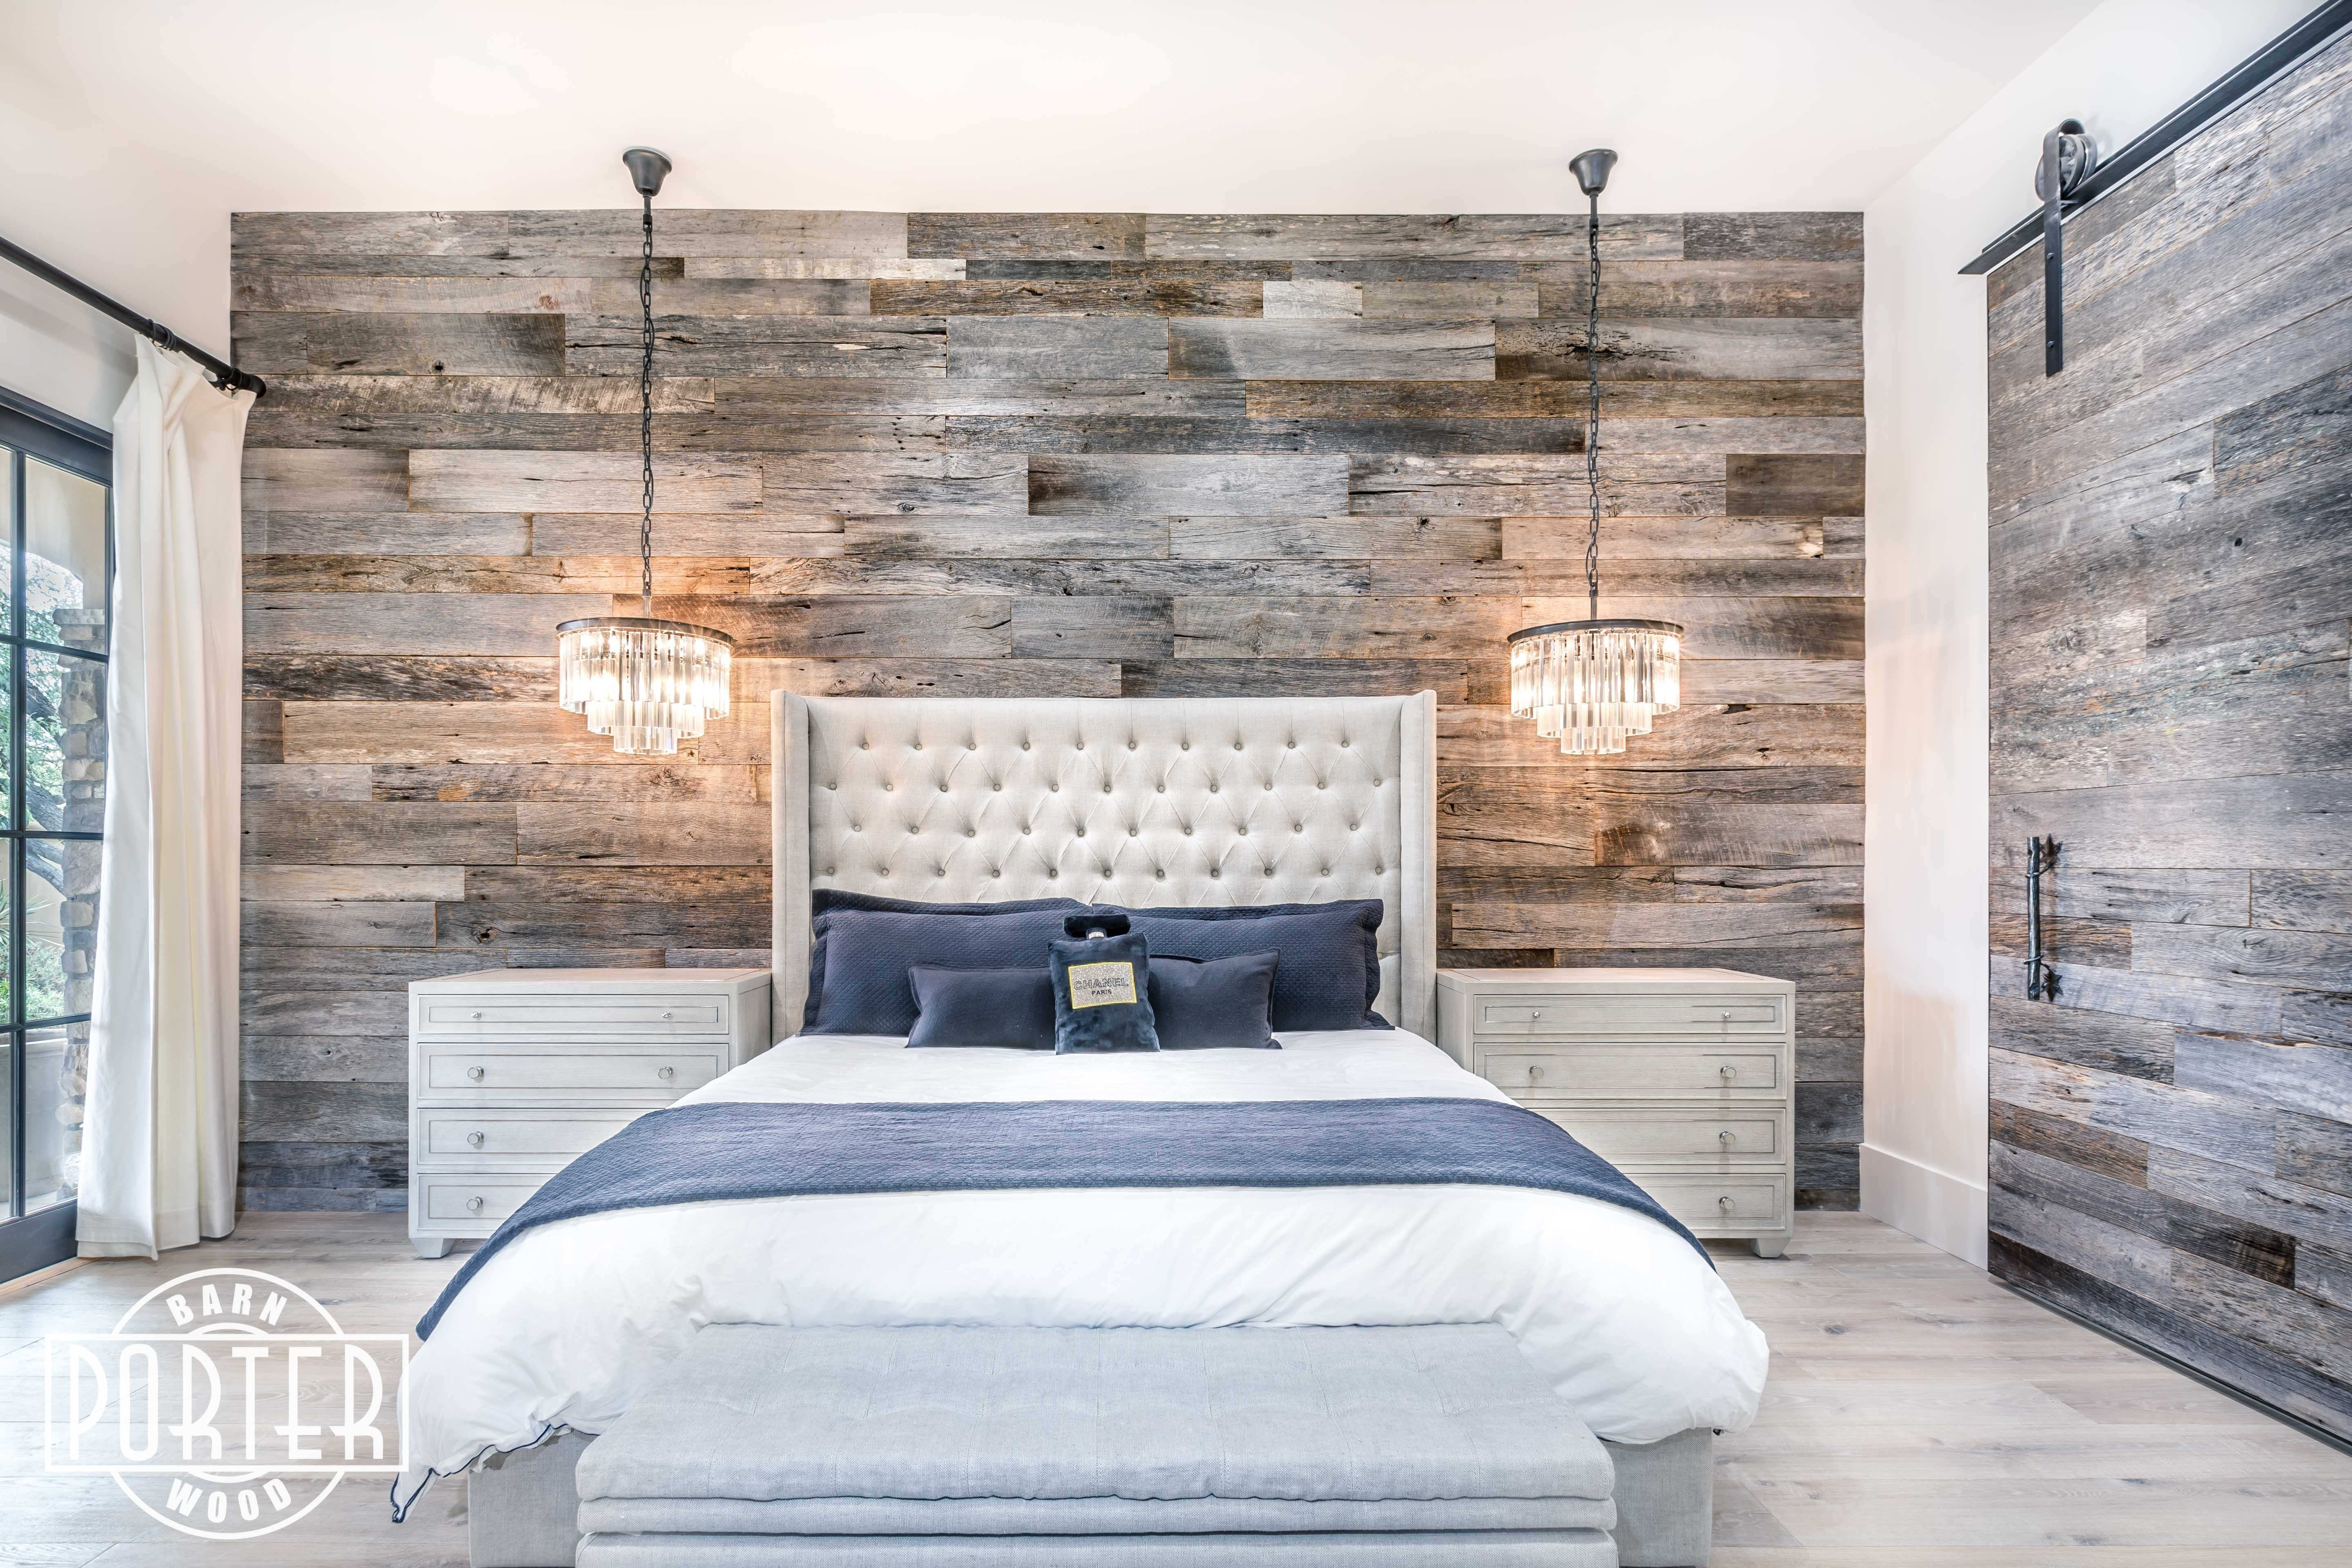 29 Lovely Hardwood Floors or Carpet In Bedrooms 2024 free download hardwood floors or carpet in bedrooms of decorating ideas for bedroom with grey walls inspirational ice within decorating ideas for bedroom with grey walls fresh bedroom bedroom wall decorat